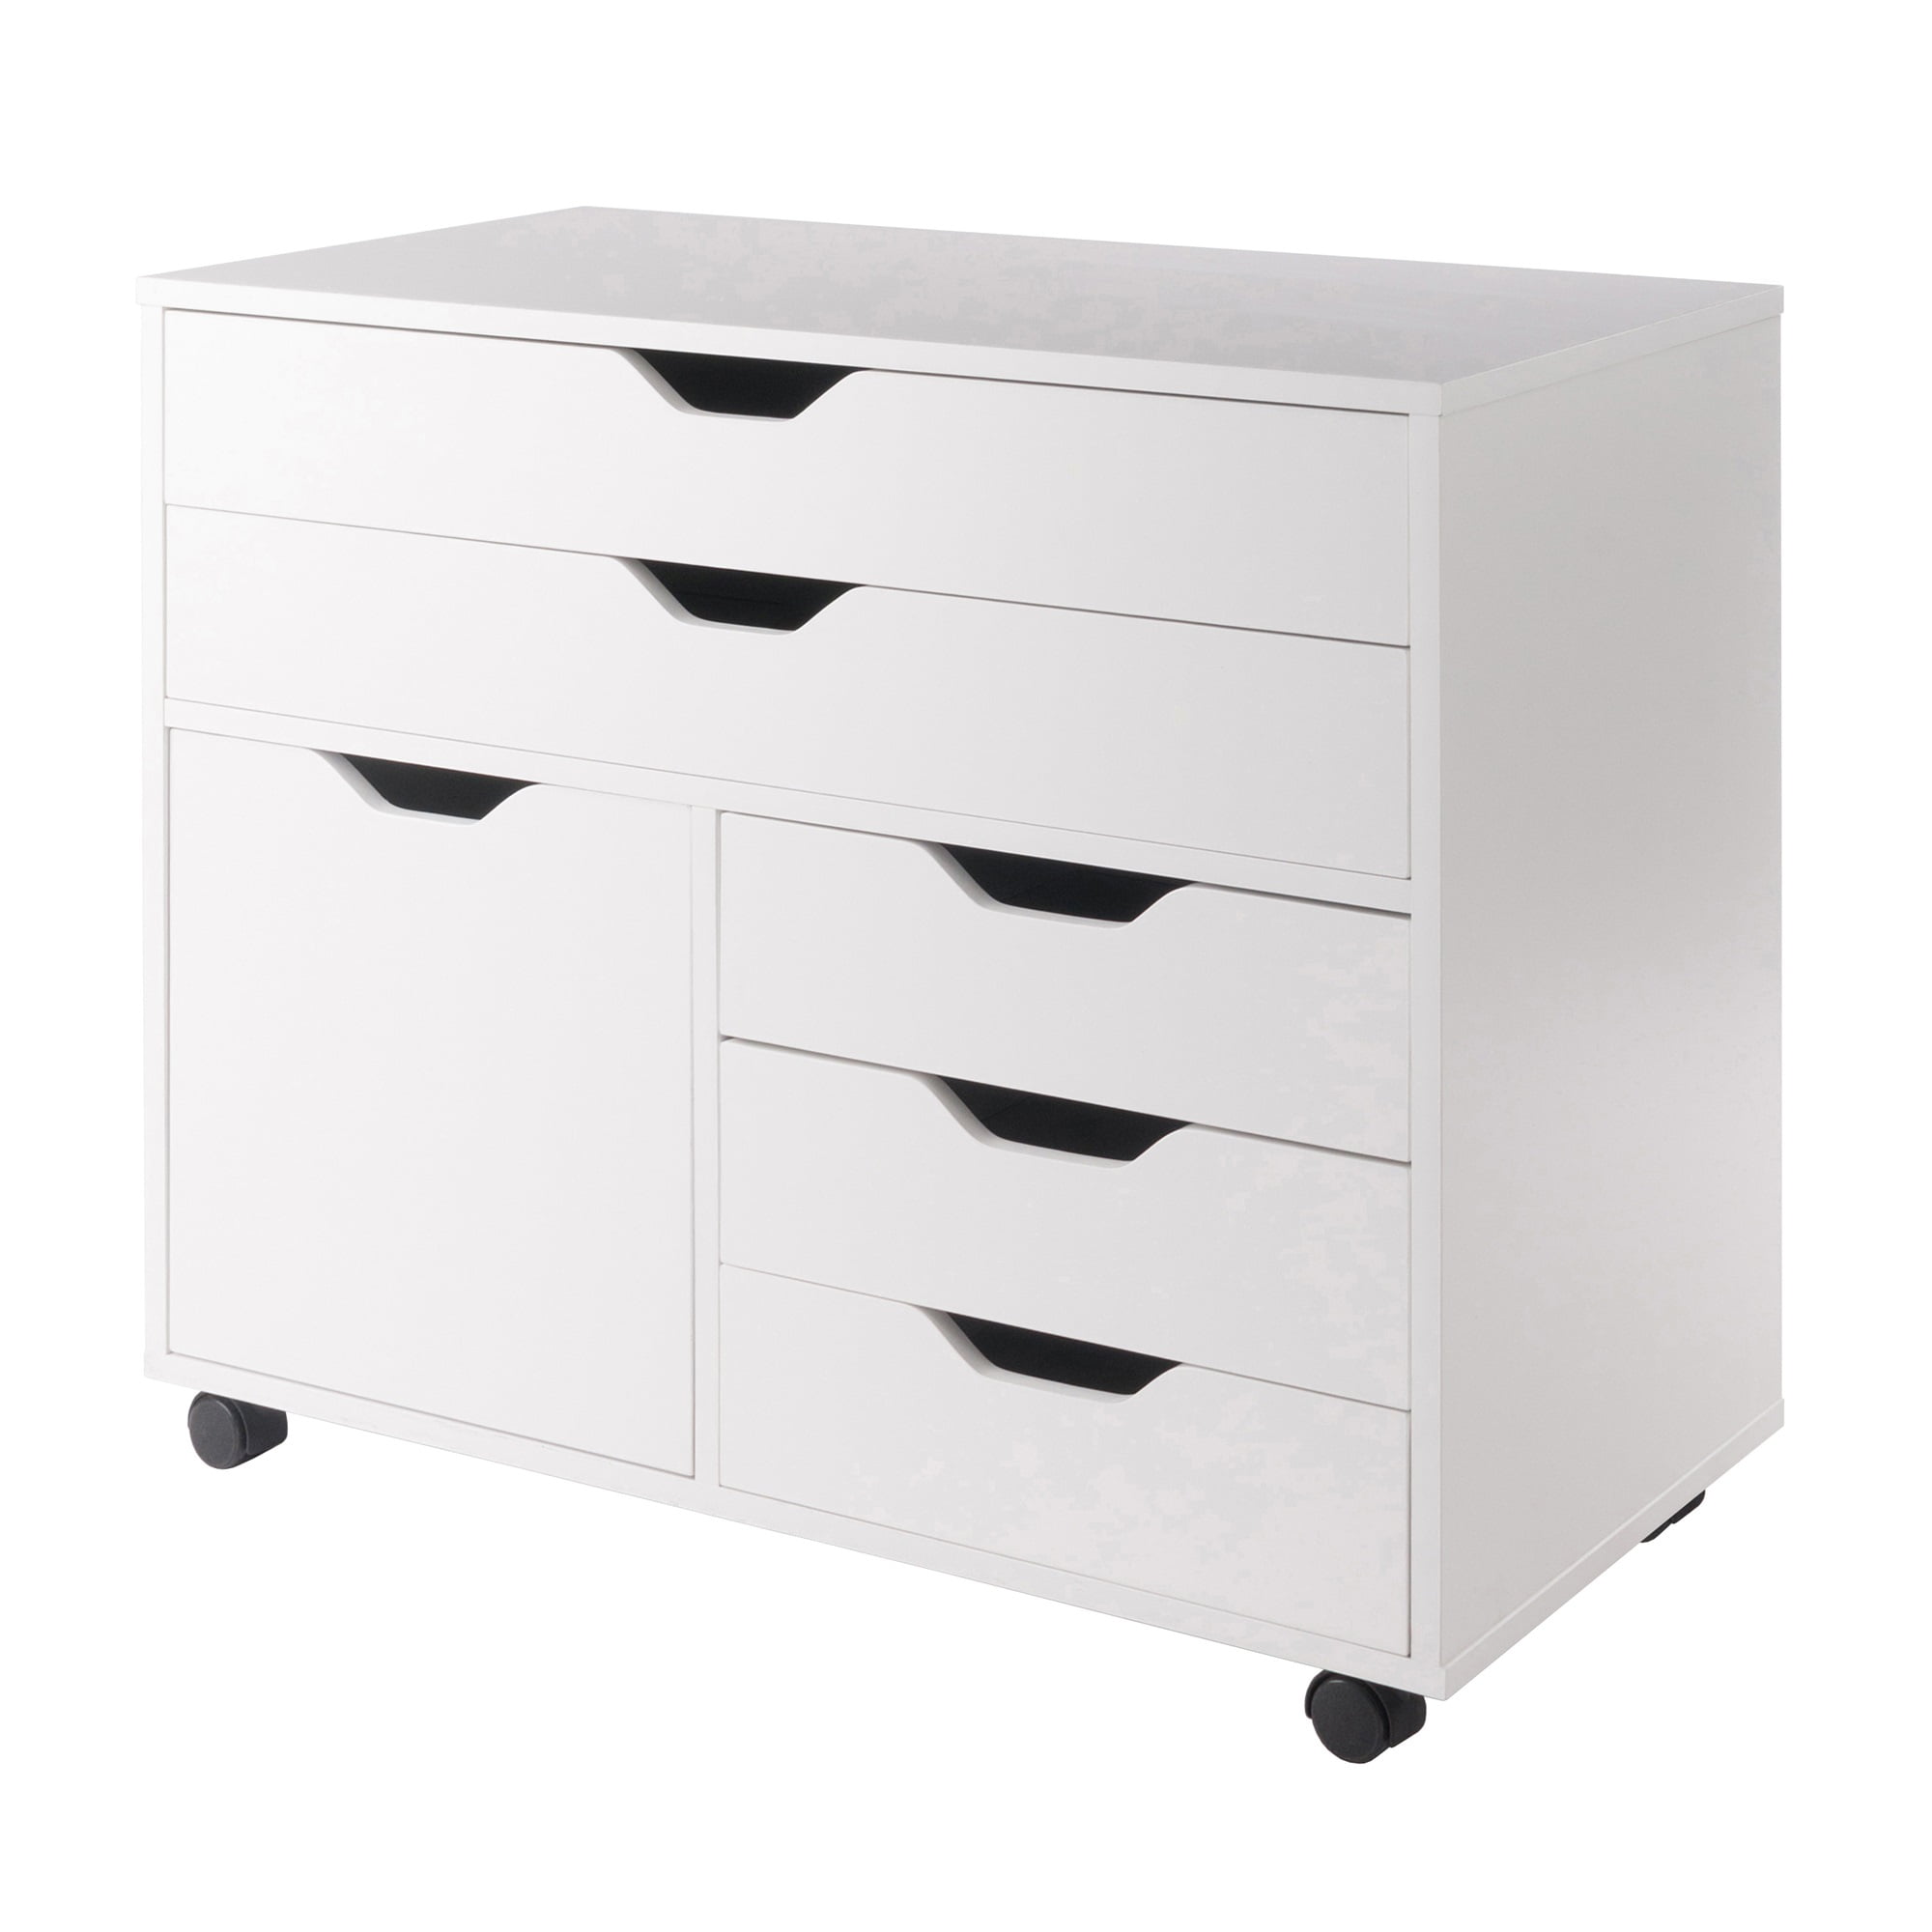 Winsome Wood Halifax 3-Section Mobile Storage Cabinet, White Finish